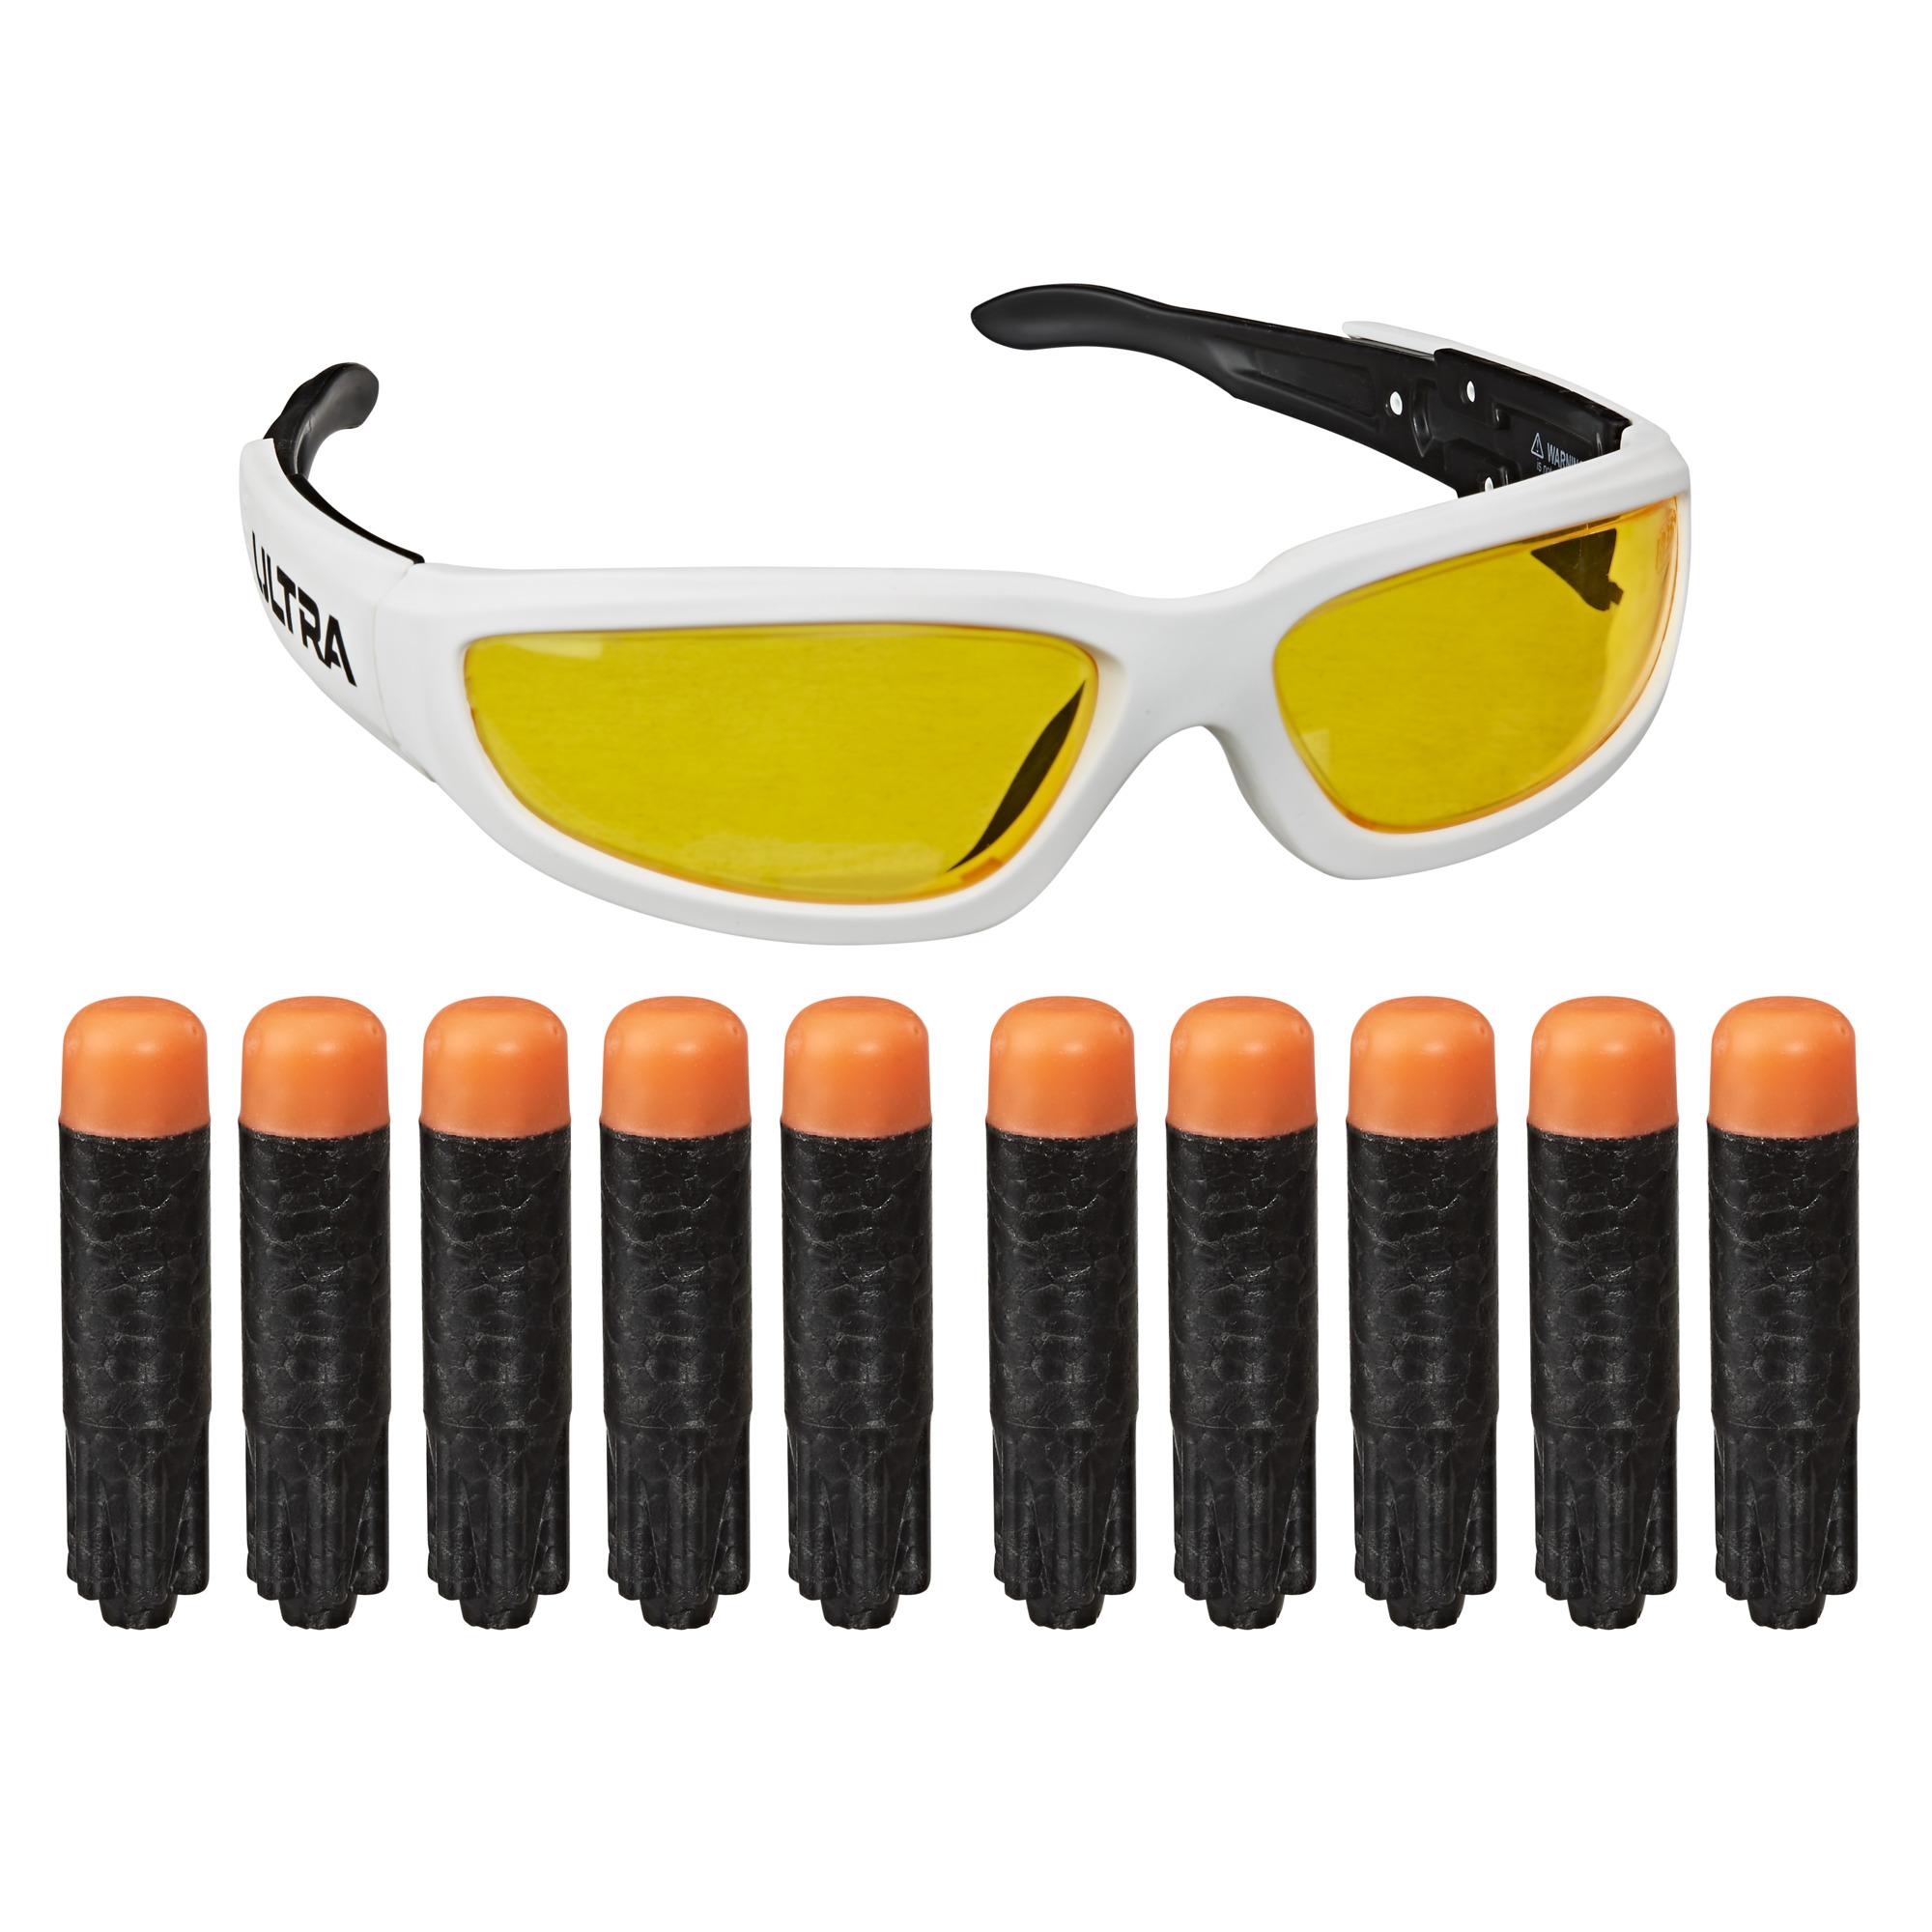 NERF ULTRA VISION GEAR